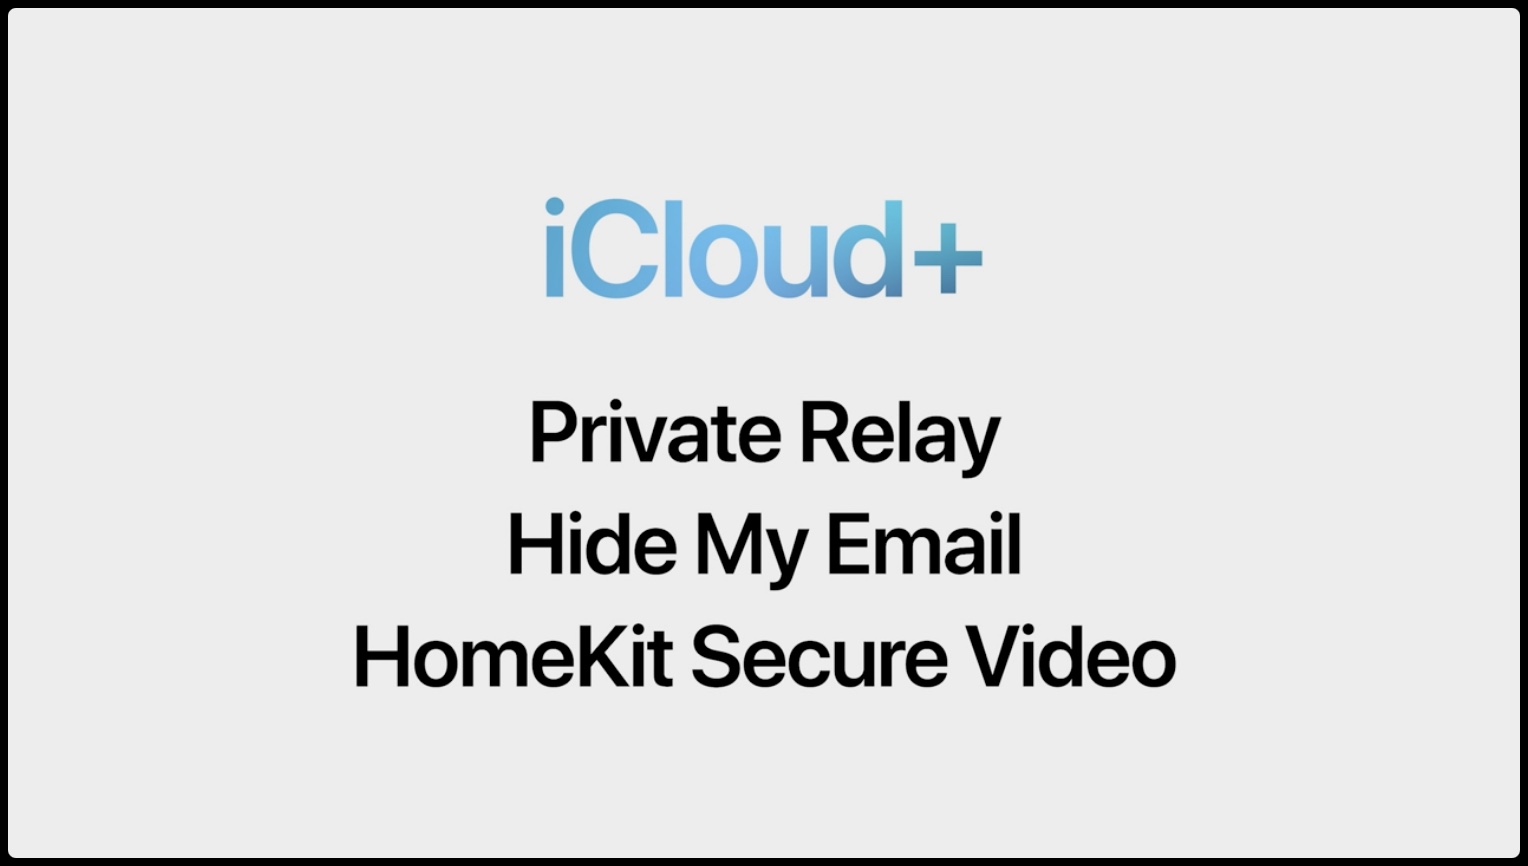 Apple's WWDC21 slide promoting iCloud+ with a list of features like iCloud iCloud Private Relay, Hide My Email and HomeKit Secure Video